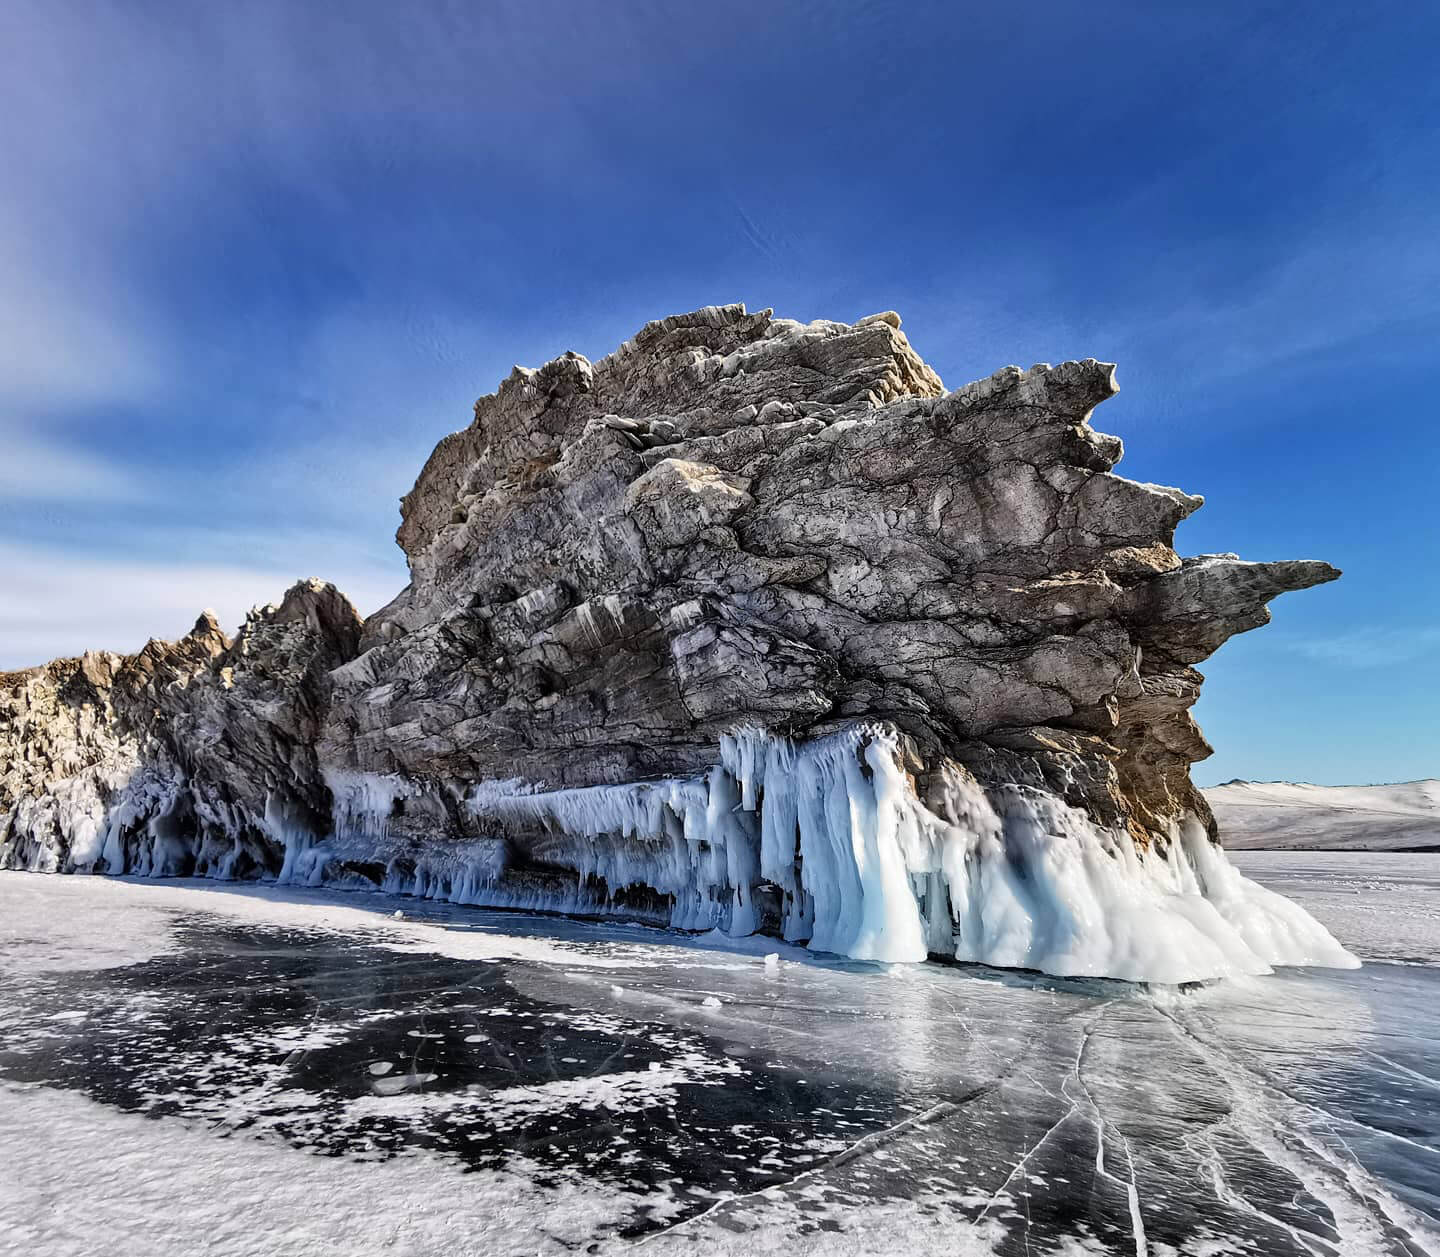 An incredible formation of ice and rock on the shores of Lake Baikal, Siberia